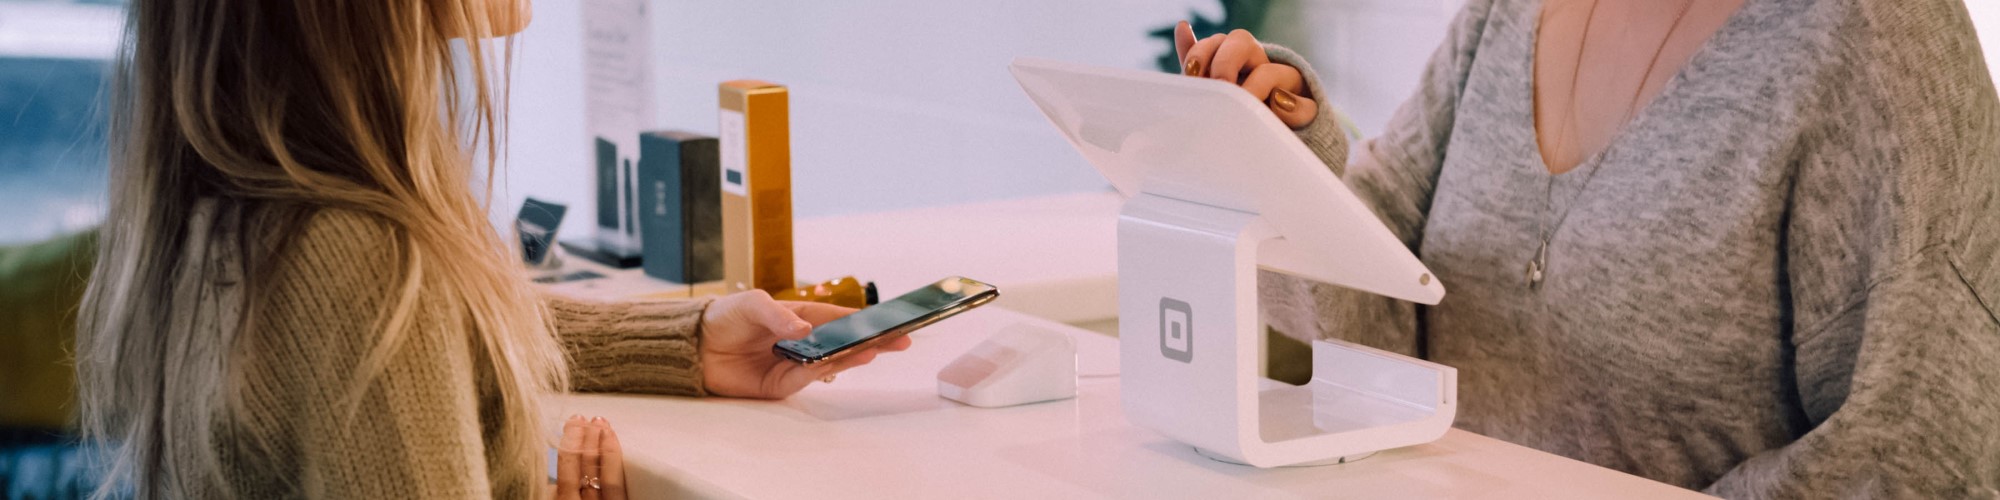 Lessons from Square